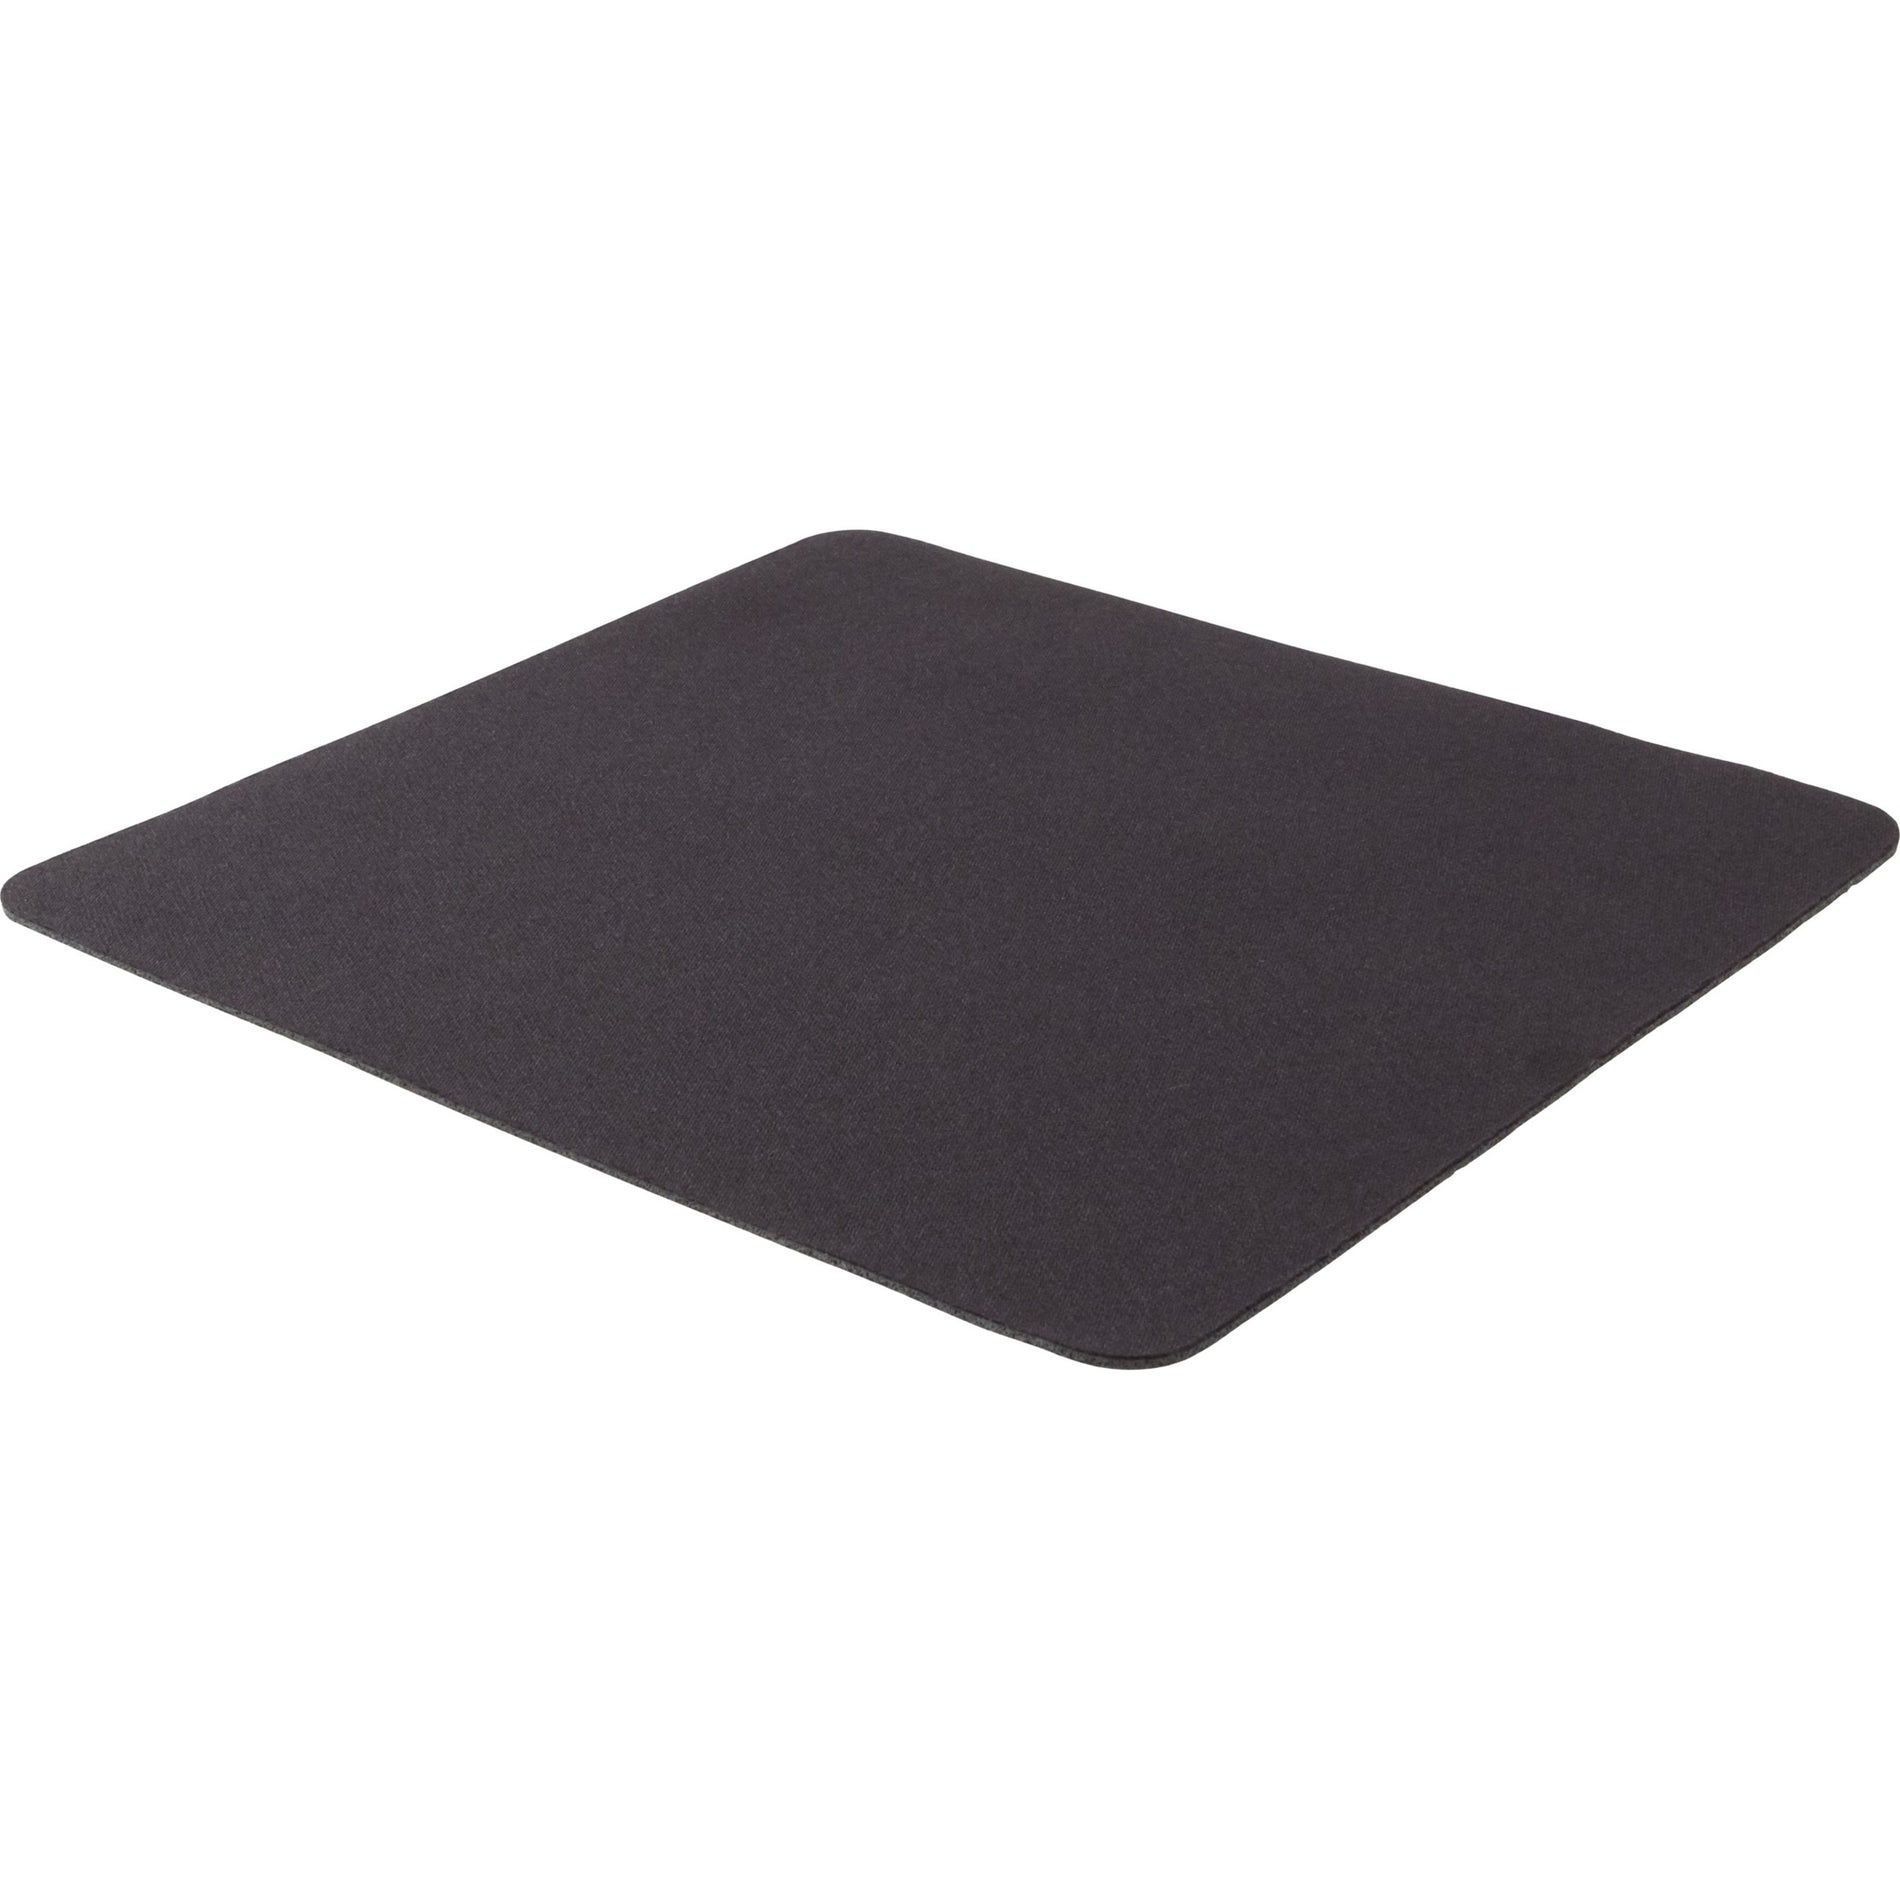 Allsop 28229 Basic Mousepad - Black, Specially Woven Surface for Better Mouse Control, Techrip Base